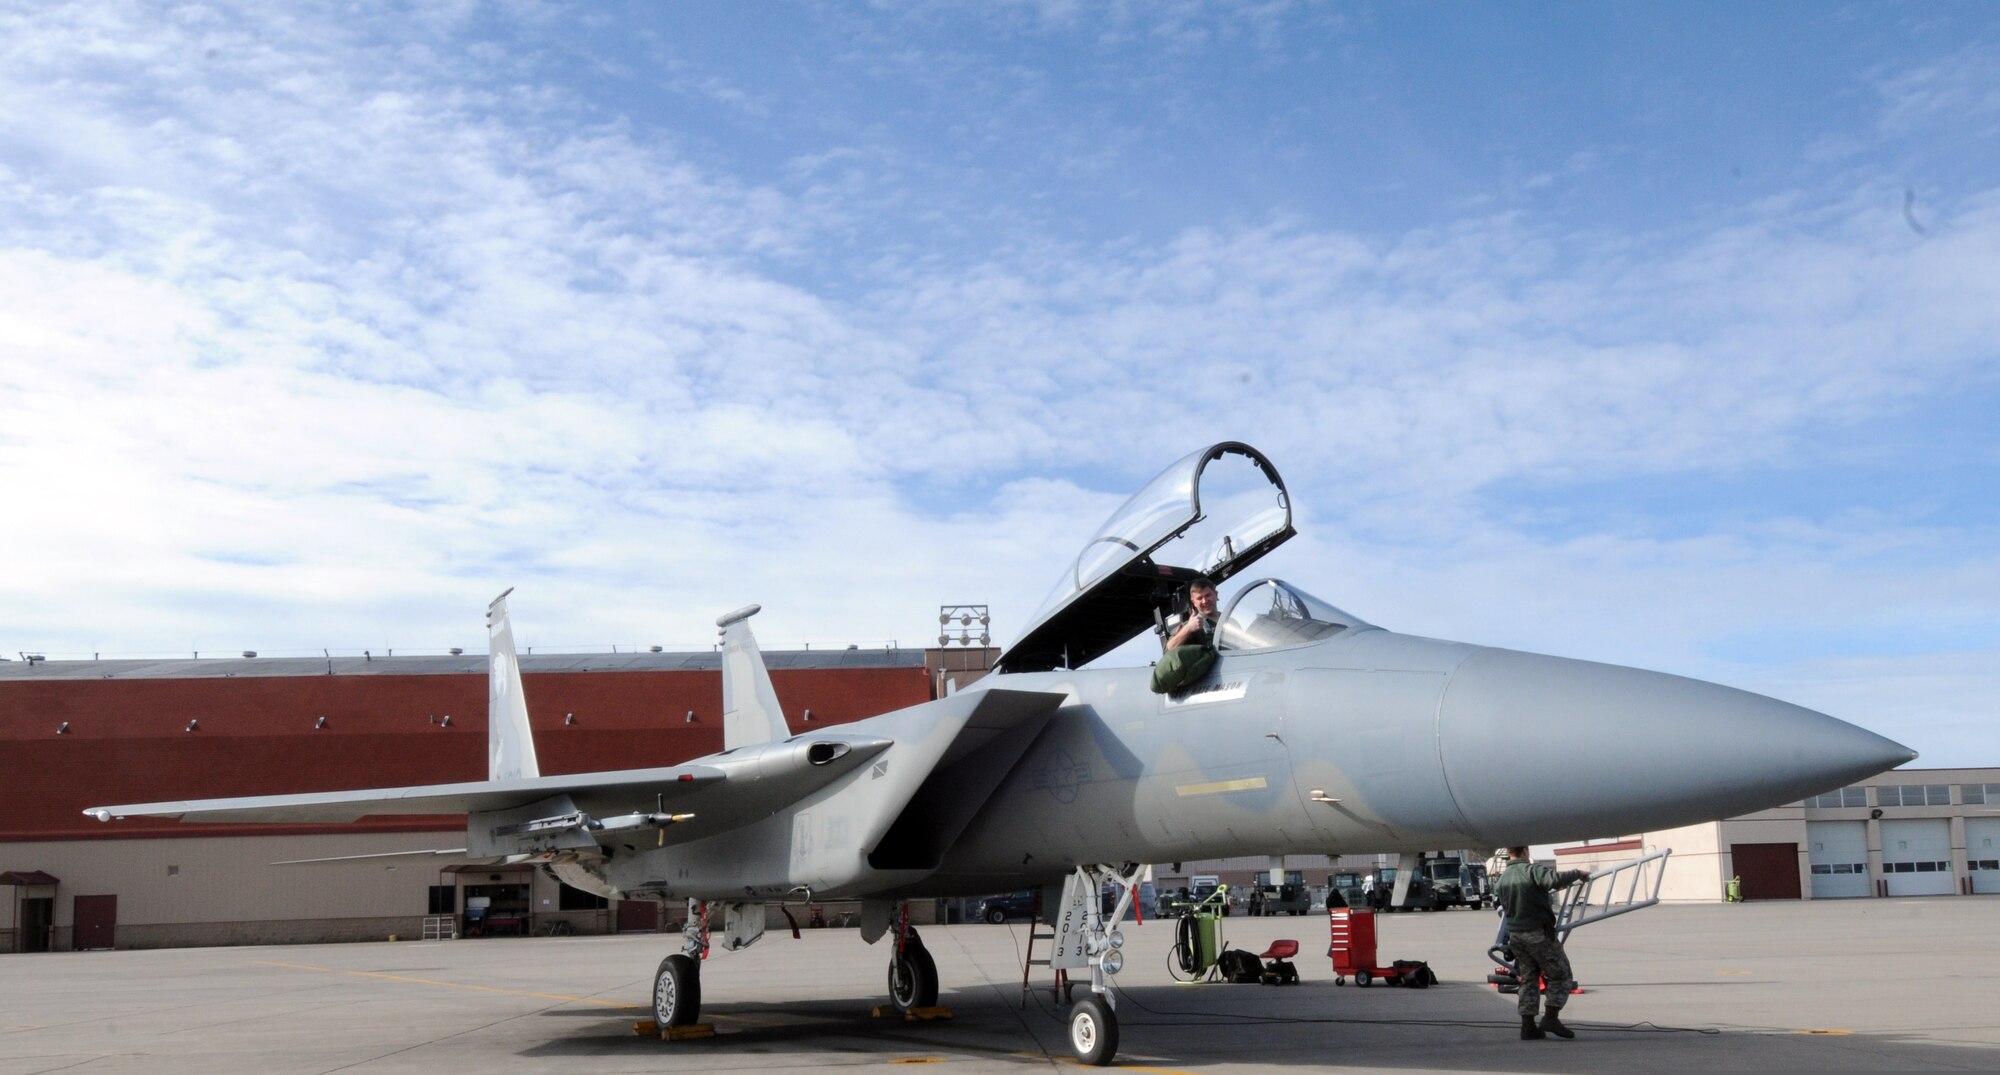 173rd Fighter Wing F-15 pilots and crew chiefs ready the aircraft for a training mission at Kingsley Field, Klamath Falls, Ore. January 27, 2015.  Unseasonably warm winter weather has proven to be beneficial to the flying mission.  (U.S. Air National Guard photo by Tech. Sgt. Daniel Condit/ released)